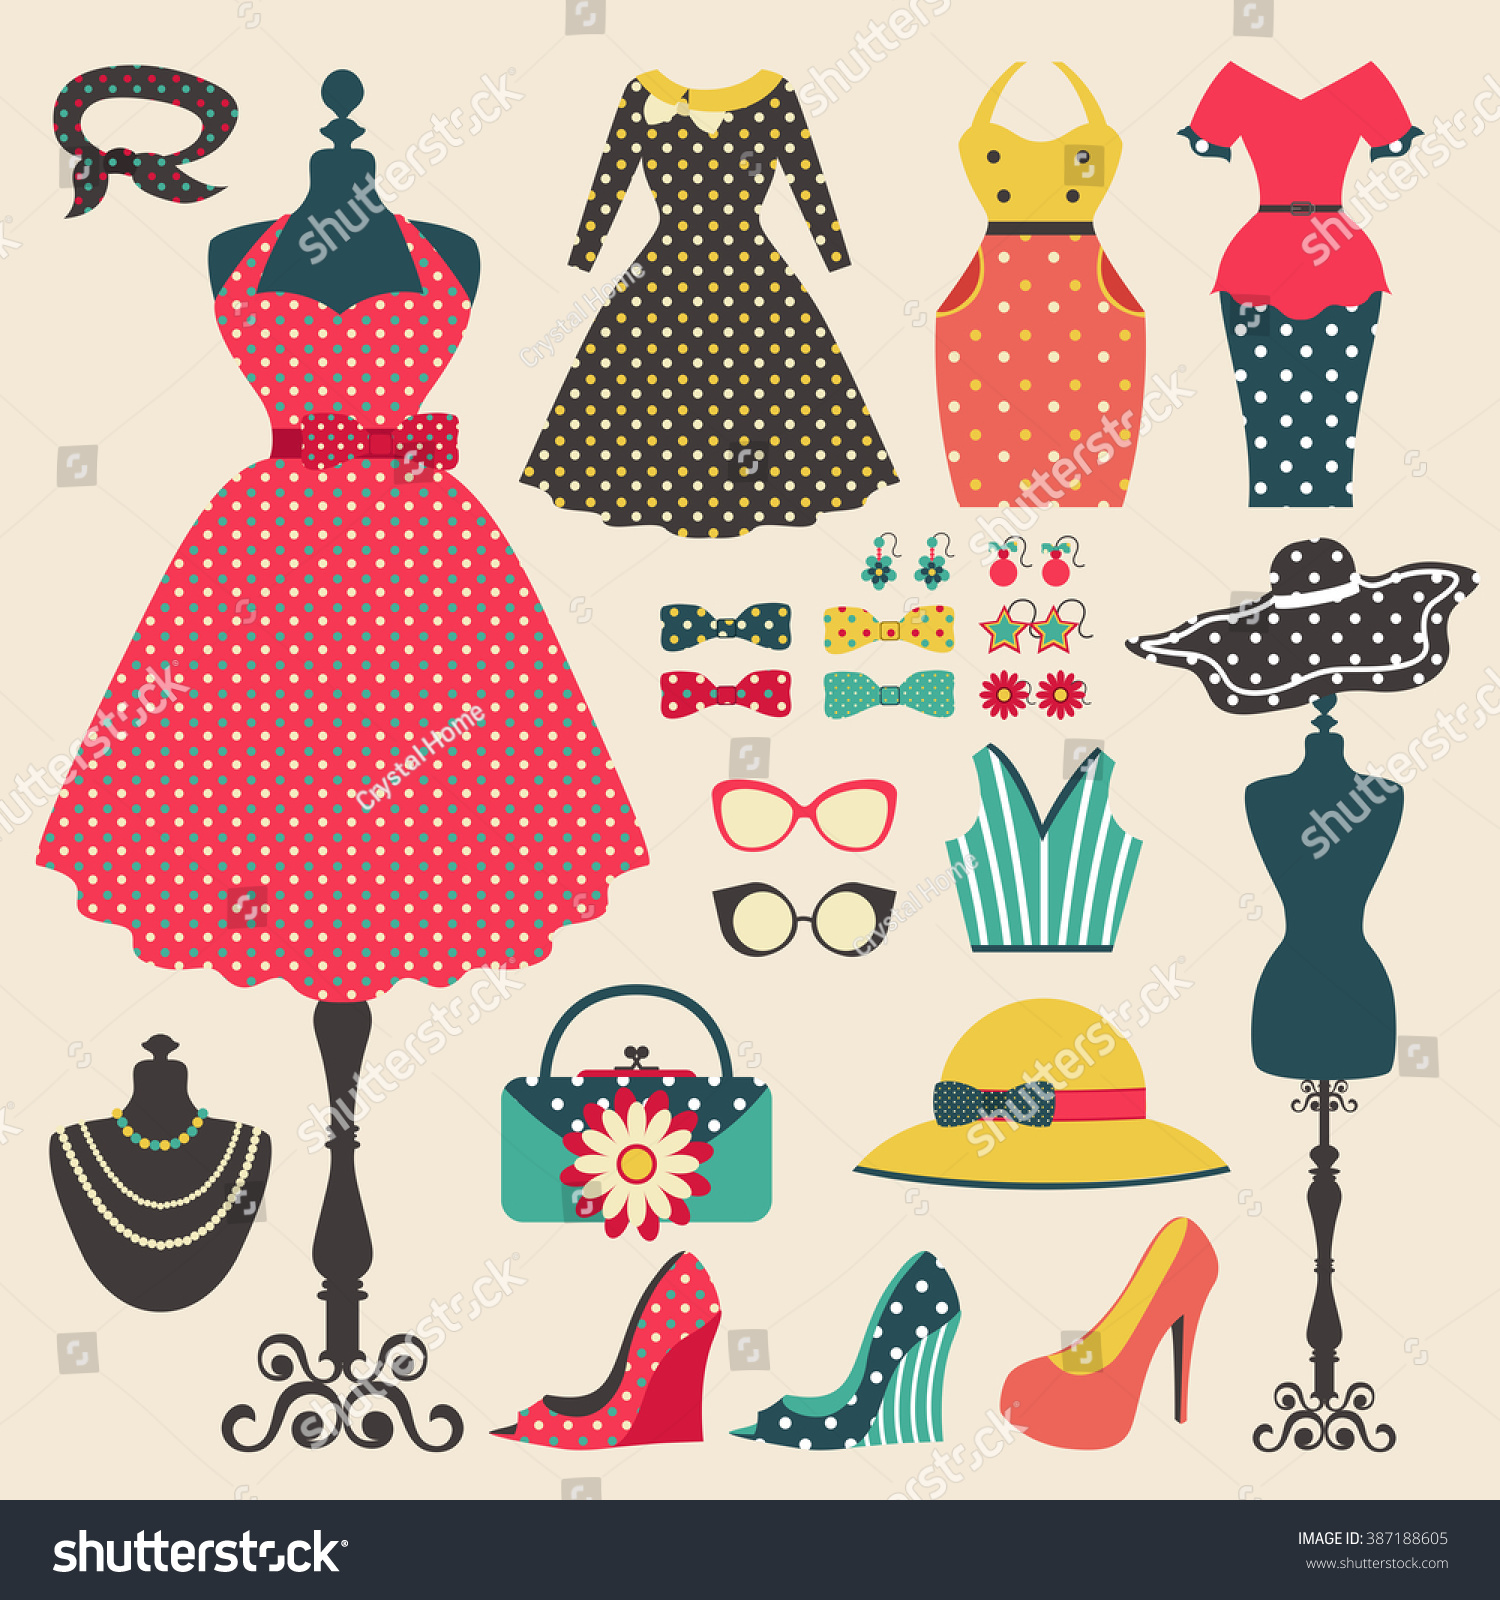 Old Retro Woman Fashion Clothes Garment Stock Vector (Royalty Free ...